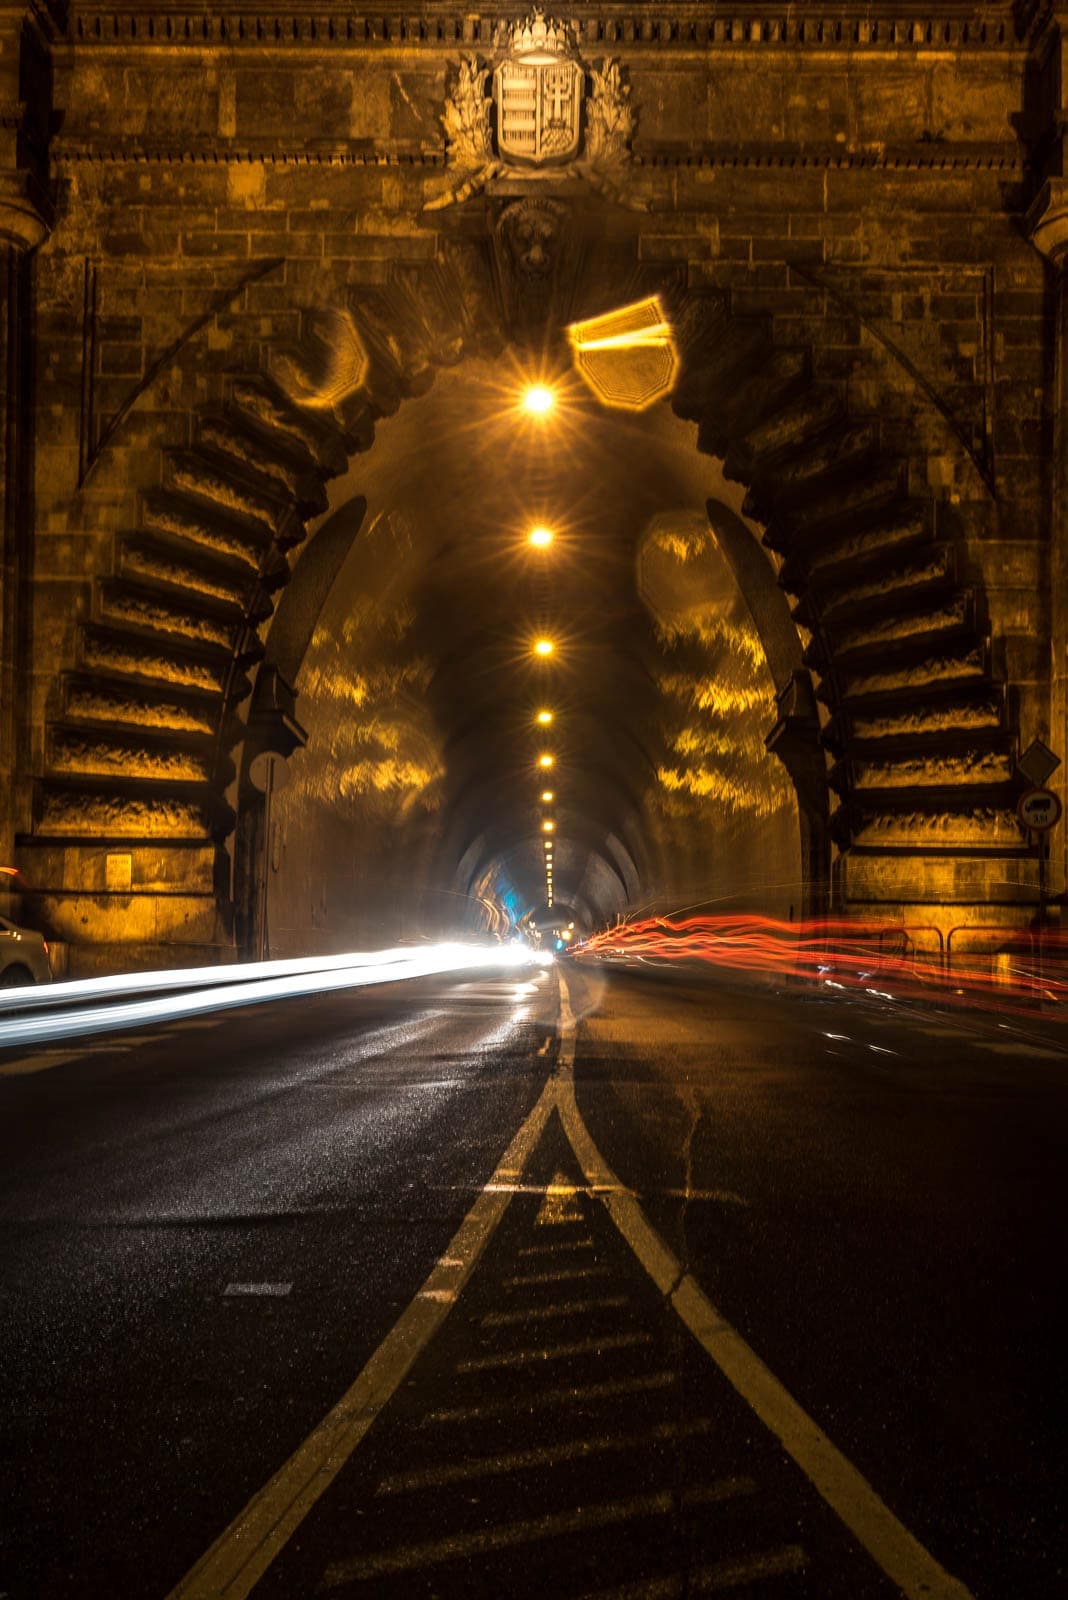 An image of a tunnel at night.